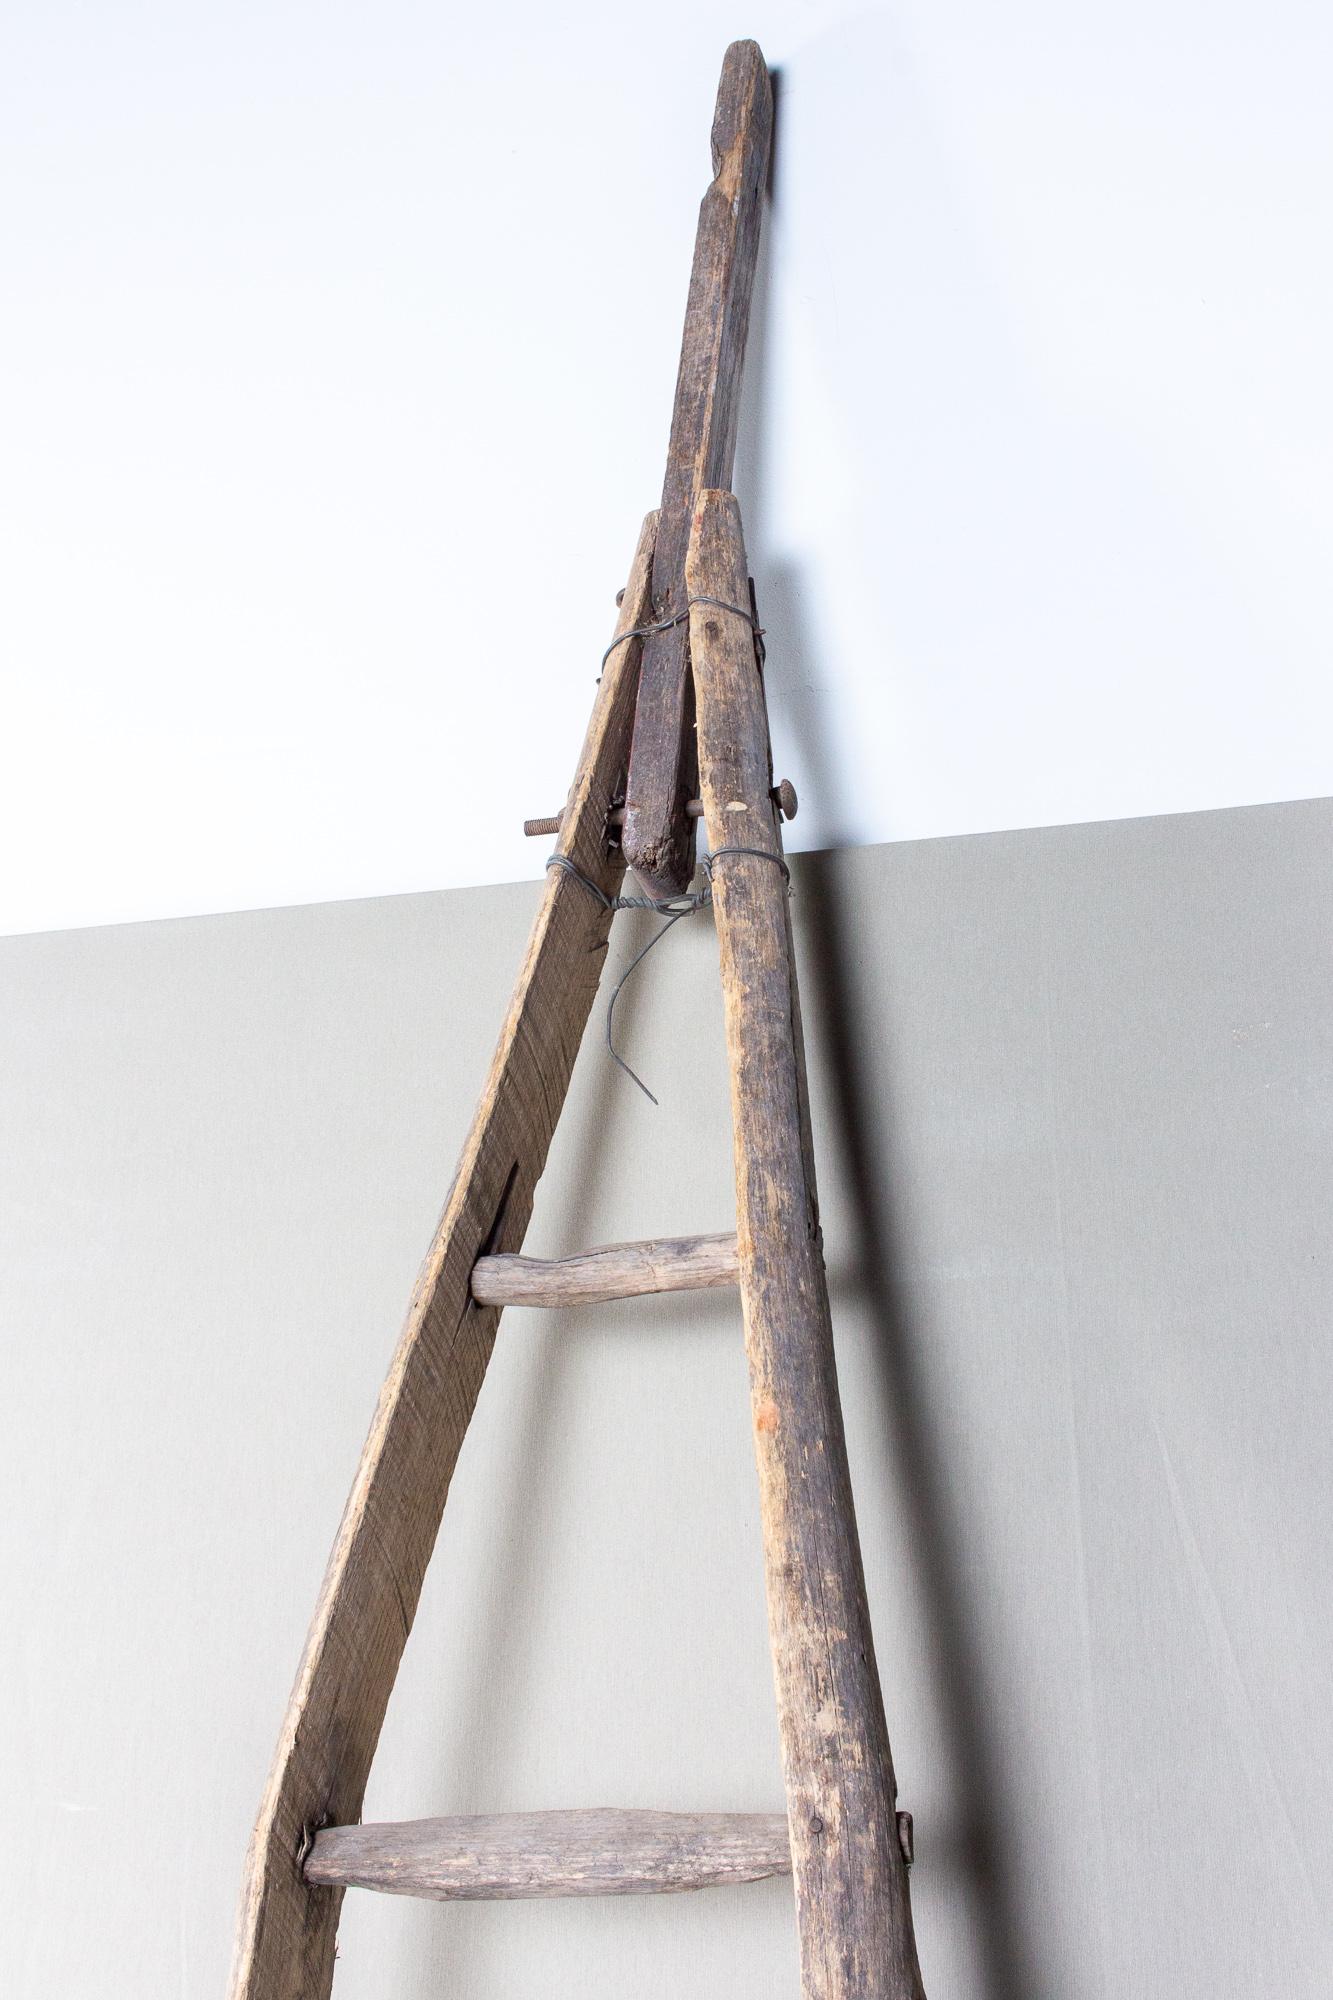 This antique French ladder was used to reach up into fruit trees, such as apples, during harvest time. It is an A-frame ladder that can be used as a rack for additional storage (such as in a bathroom for towels) or as a decorative accent. 

This